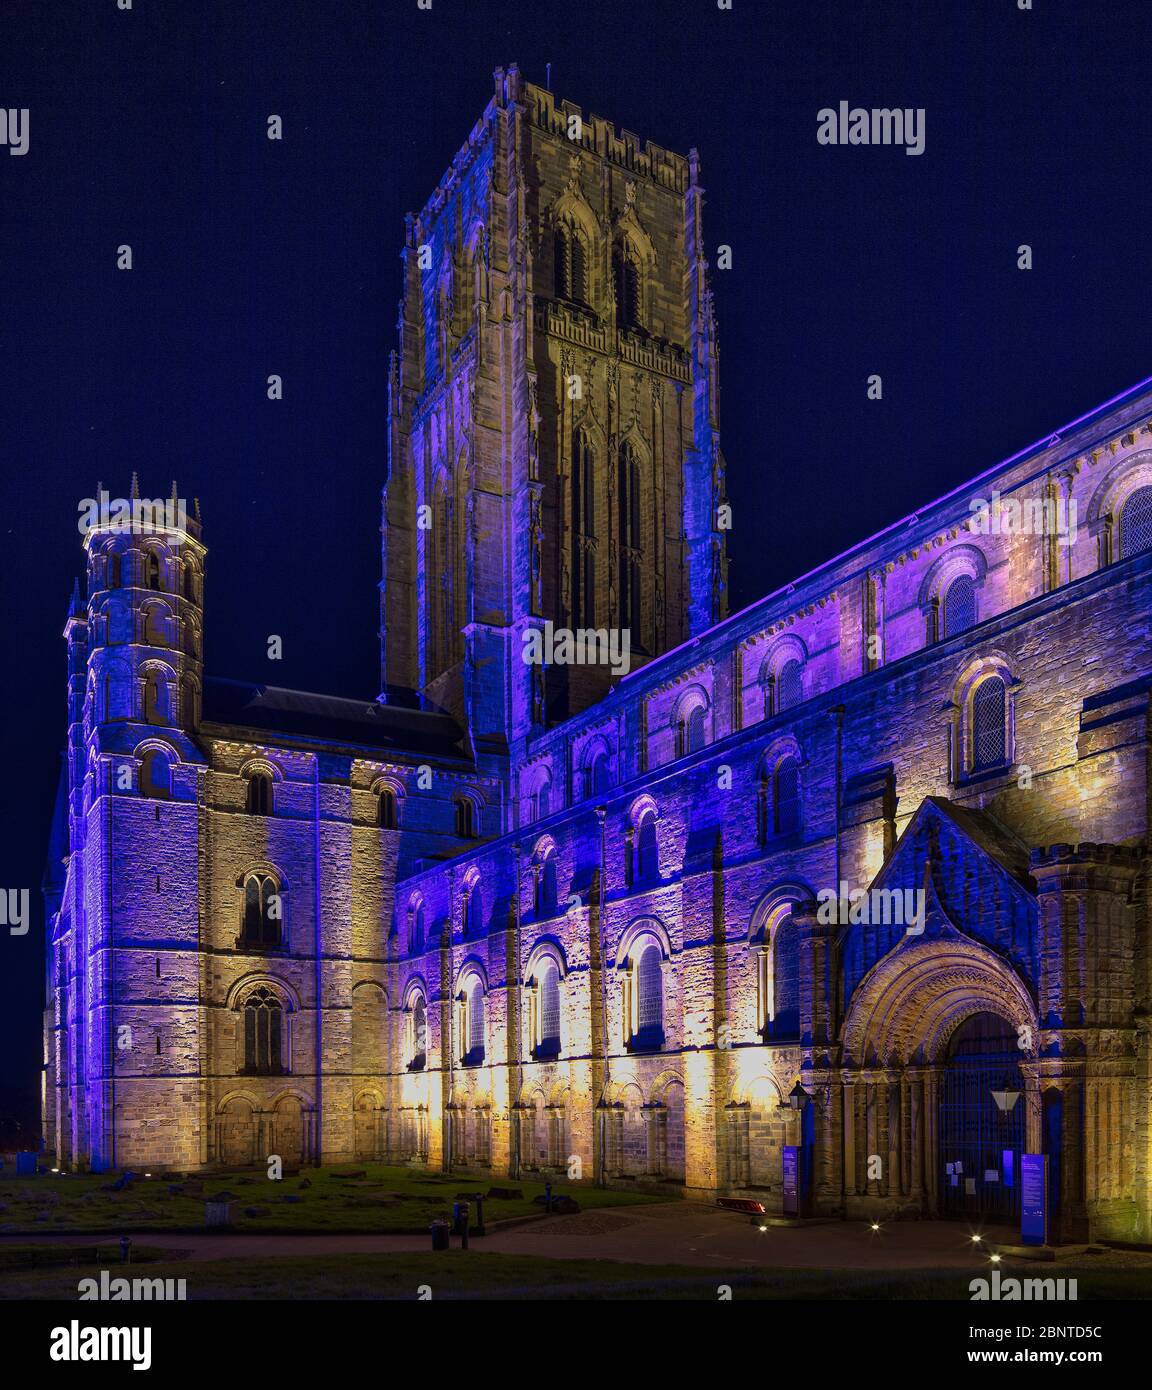 Durham Cathedral floodlit on May15 2020 in blue at night to celebrate NHS Covid19 Key Workers, Durham City, County Durham, England, United Kingdom Stock Photo